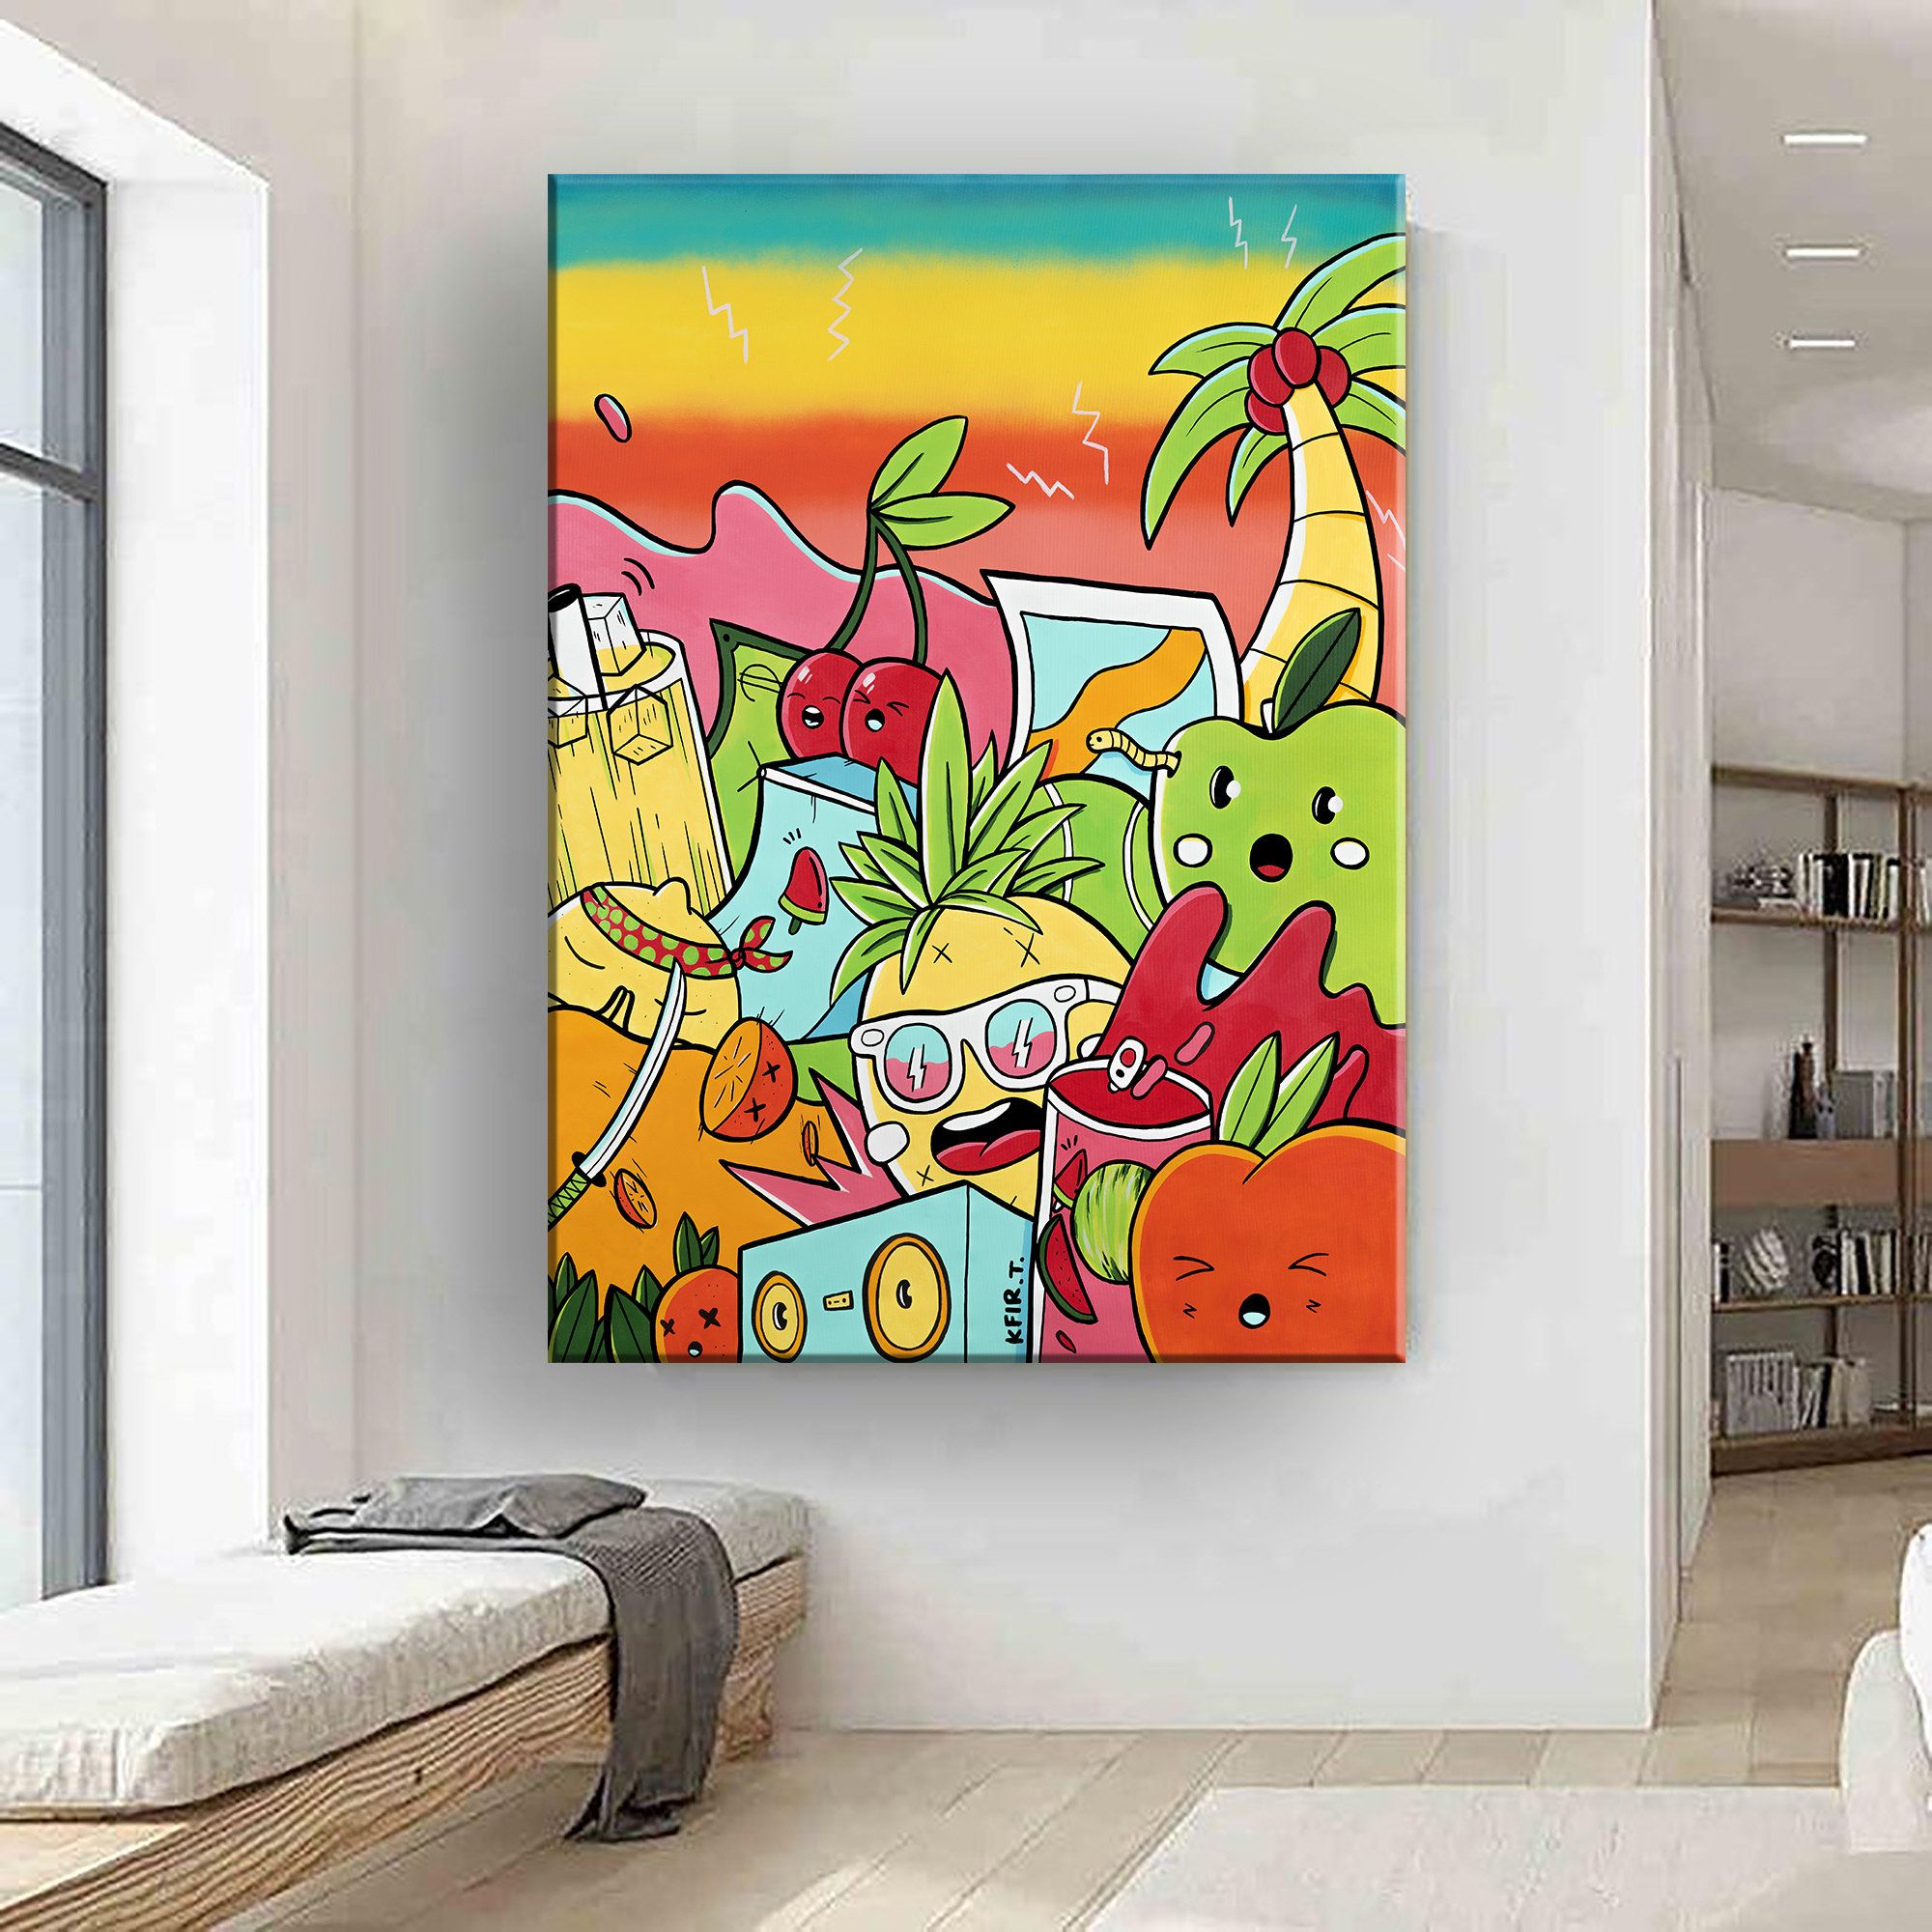 Extra Large Graffiti Style Wall Art Vertical Colorful Street – Etsy Intended For Graffiti Style Wall Art (View 1 of 15)